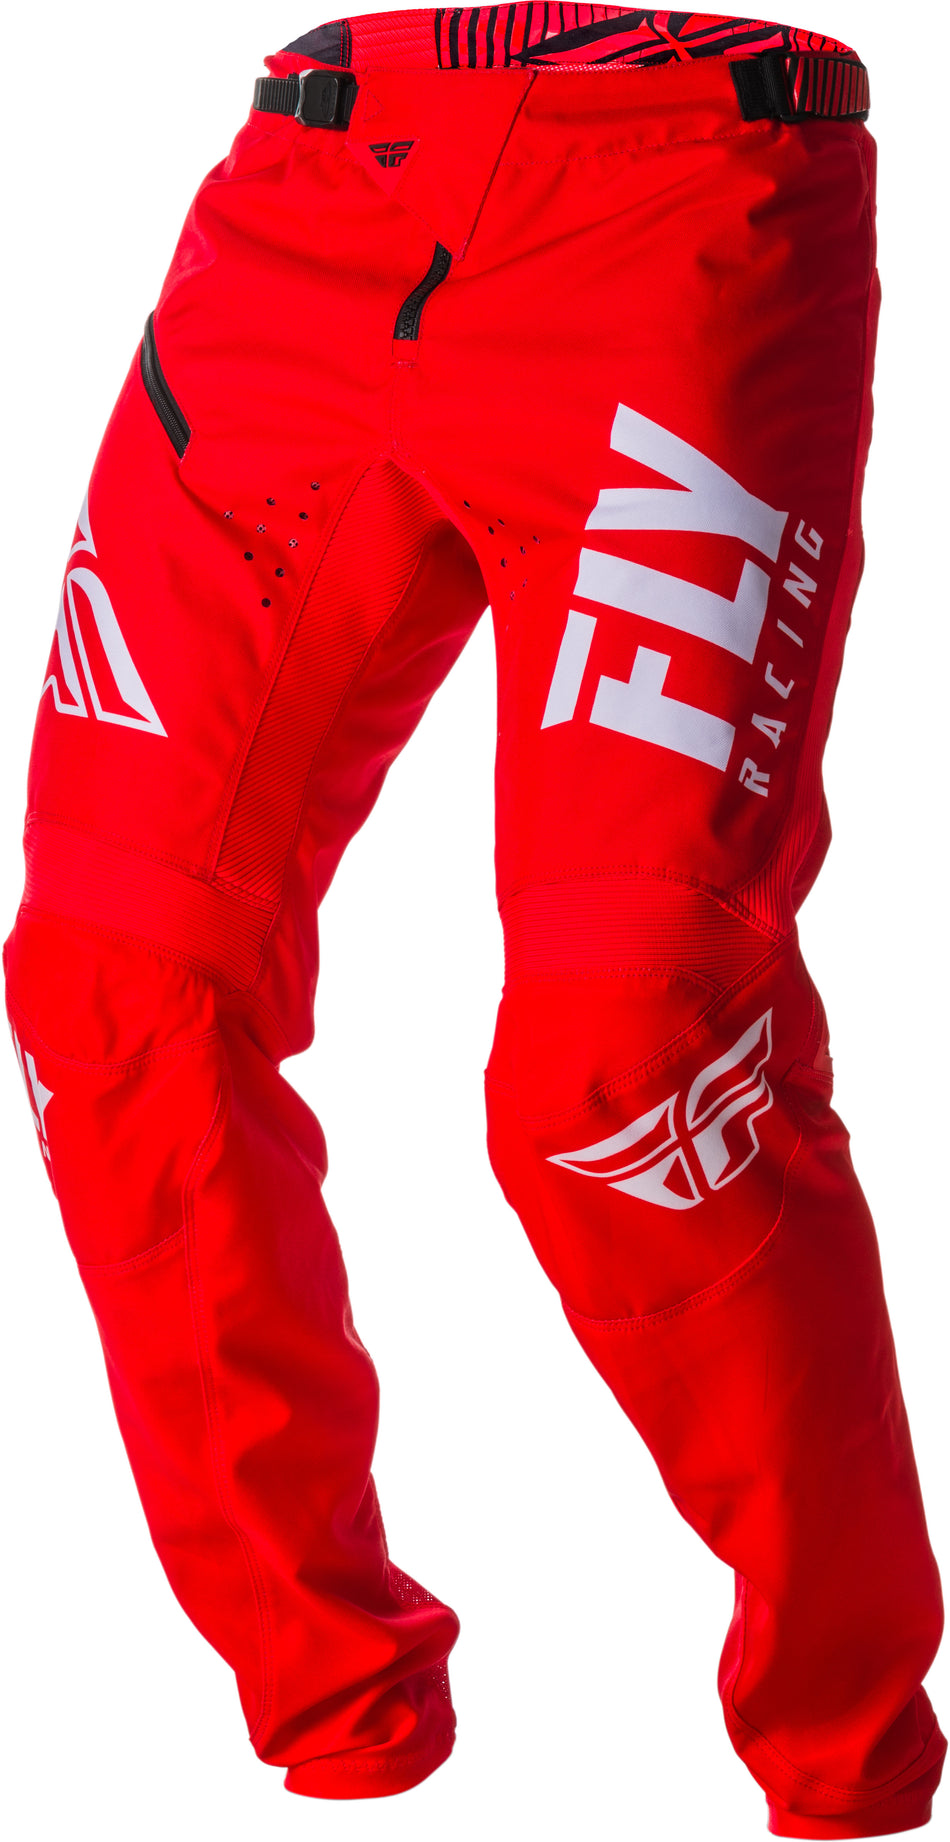 FLY RACING Kinetic Shield Bicycle Pants Red/White Sz 22 372-02222